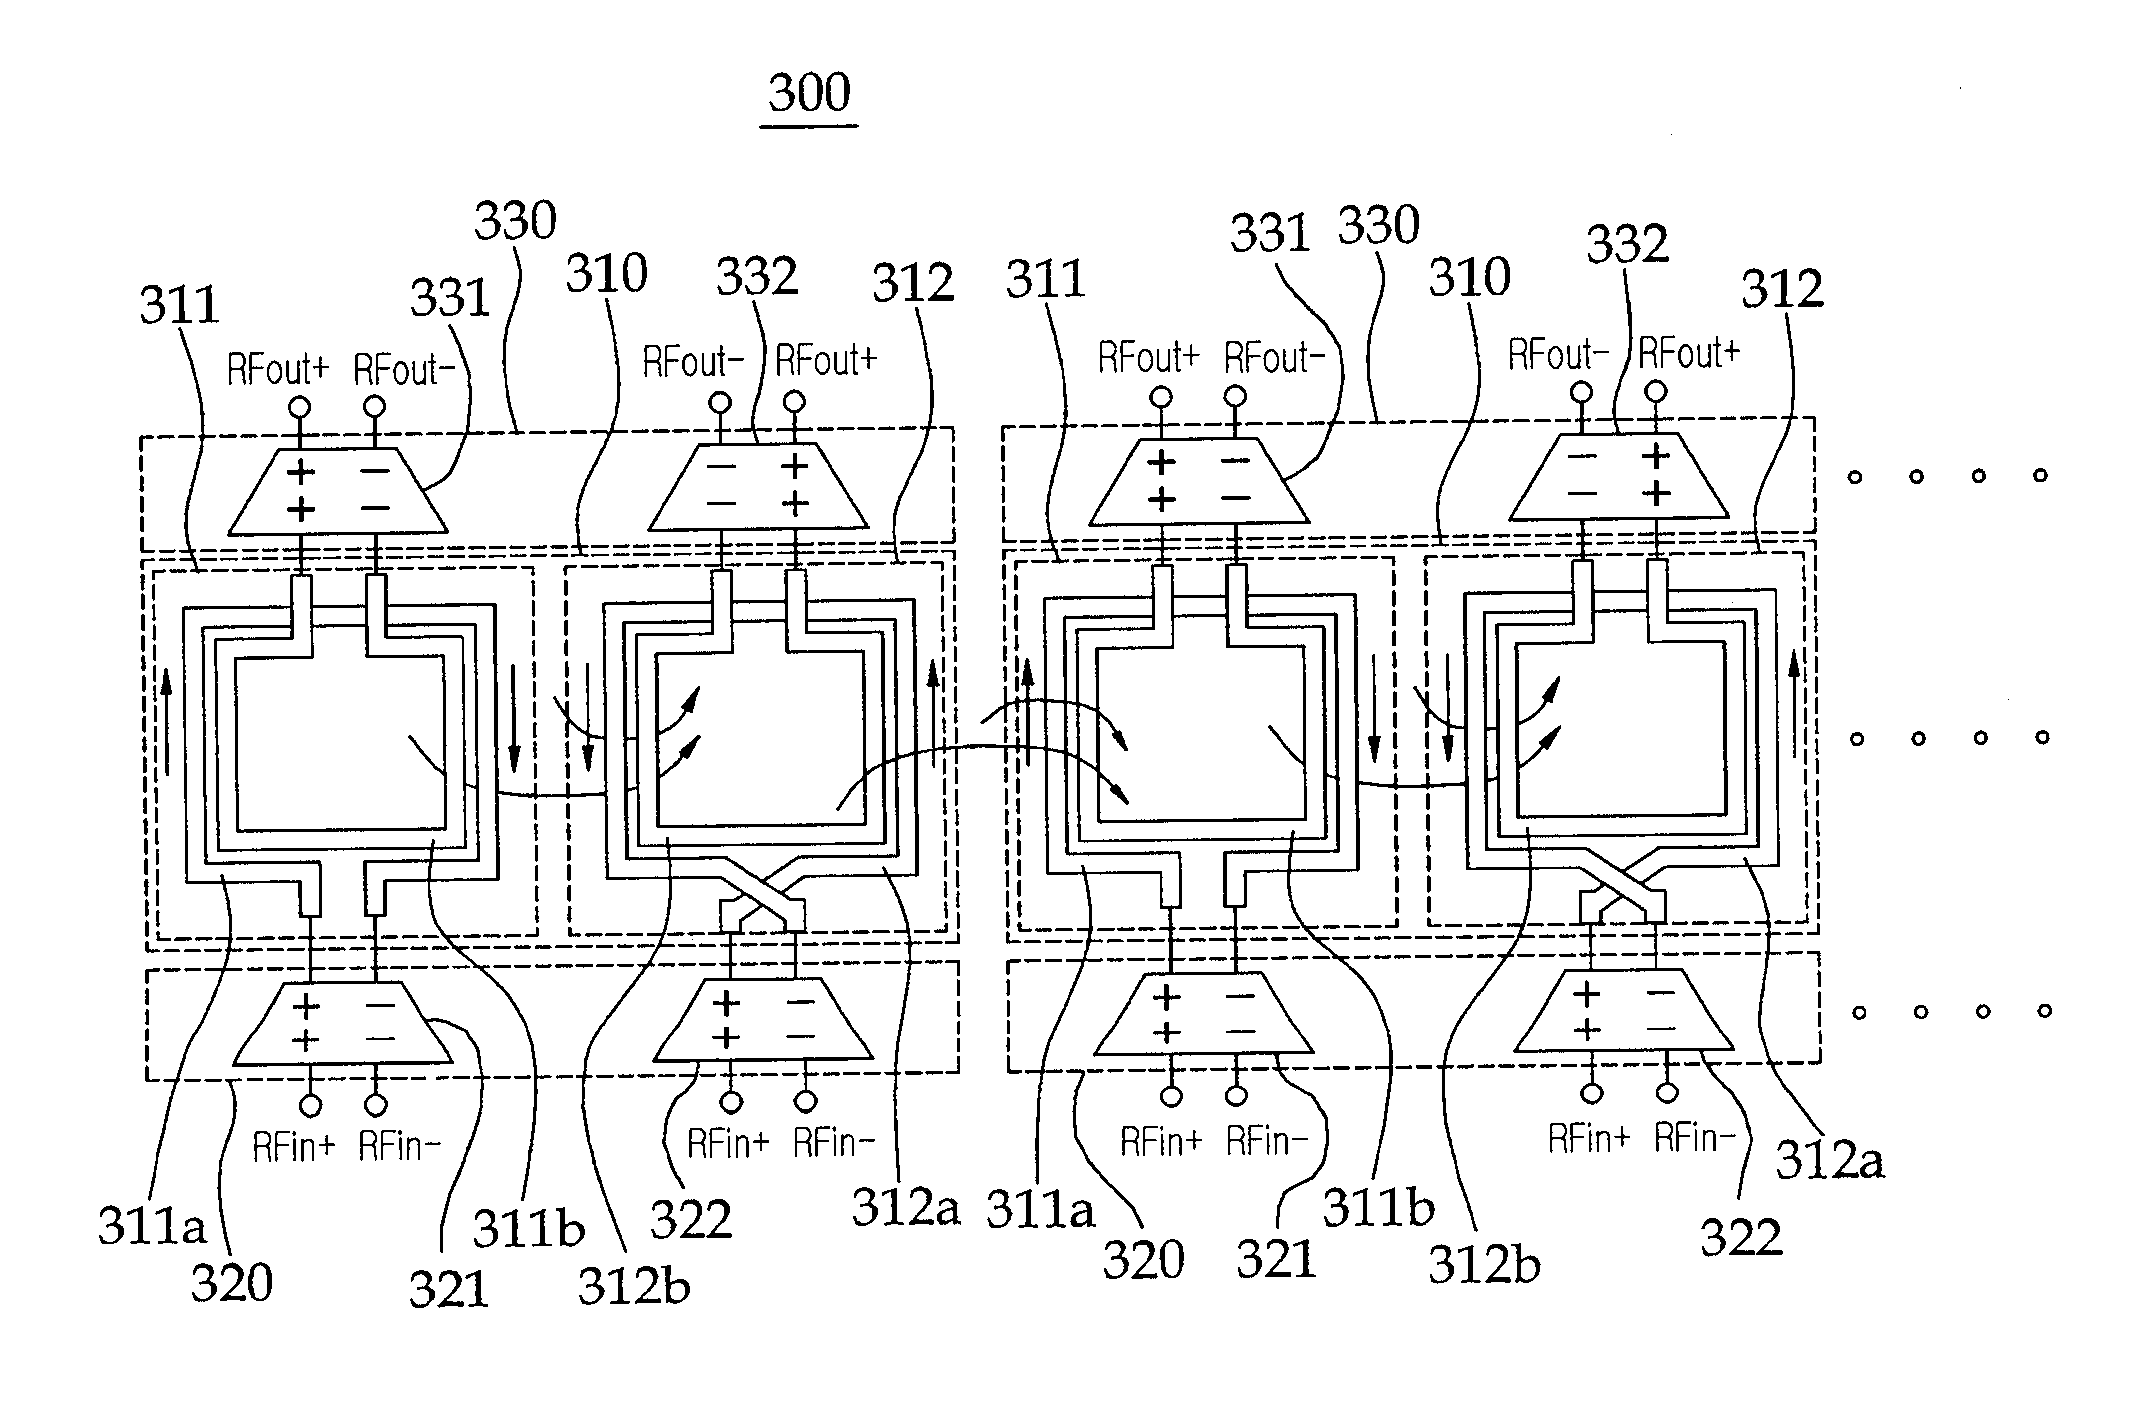 Impedance matching circuit eliminating interference between signal lines and power amplifier having the same